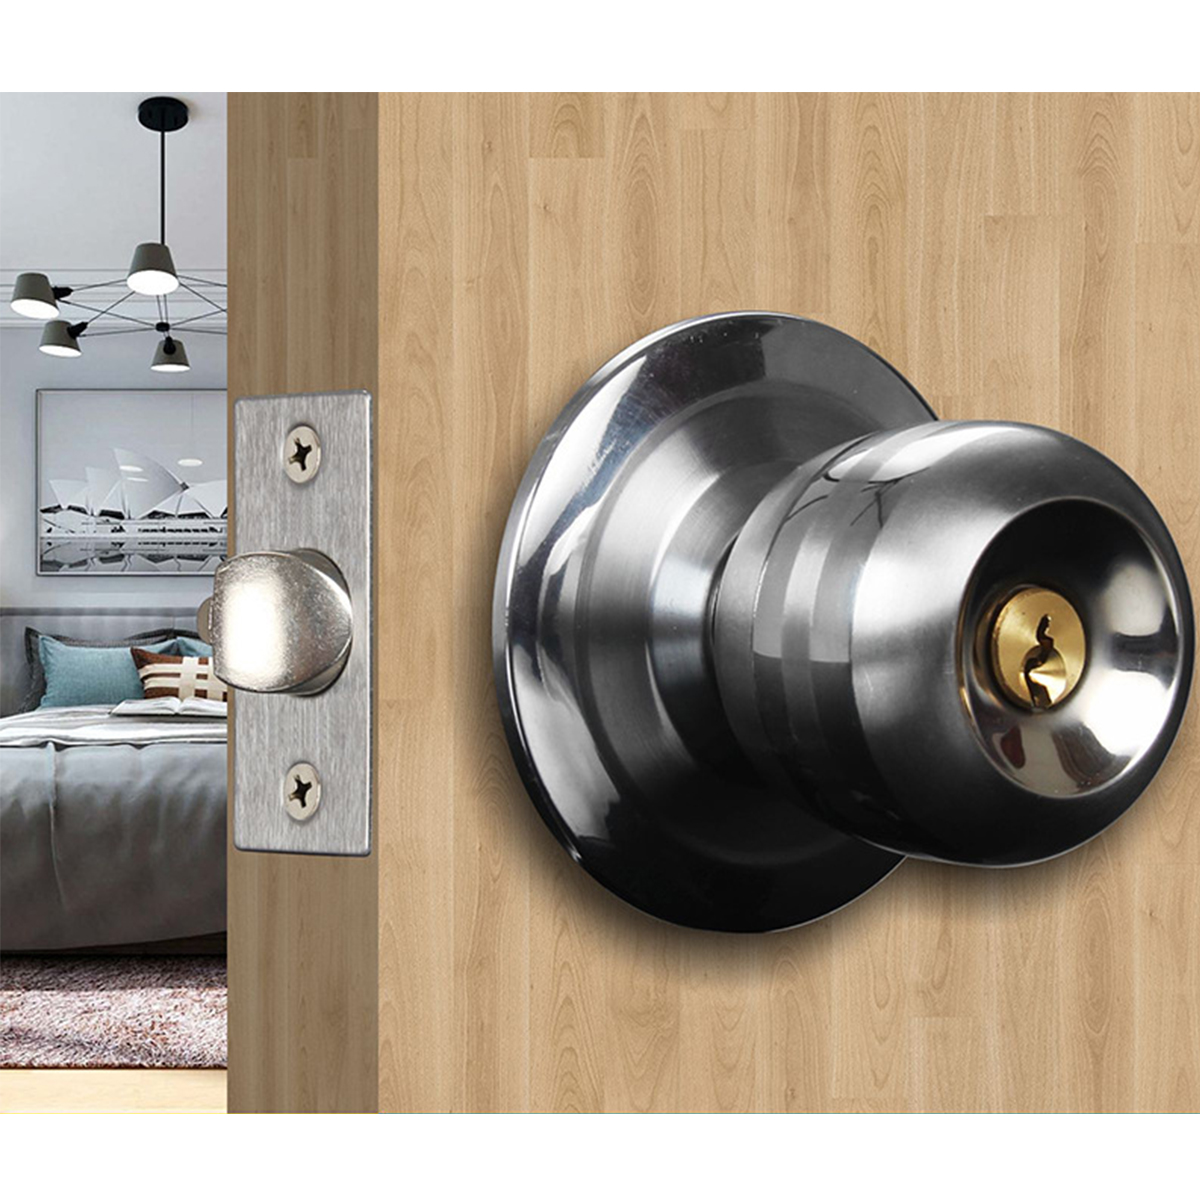 Stainless-Steel-Round-Door-Knobs-Privacy-Passage-Entrance-Lock-Entry-with-3-Keys-1680554-5